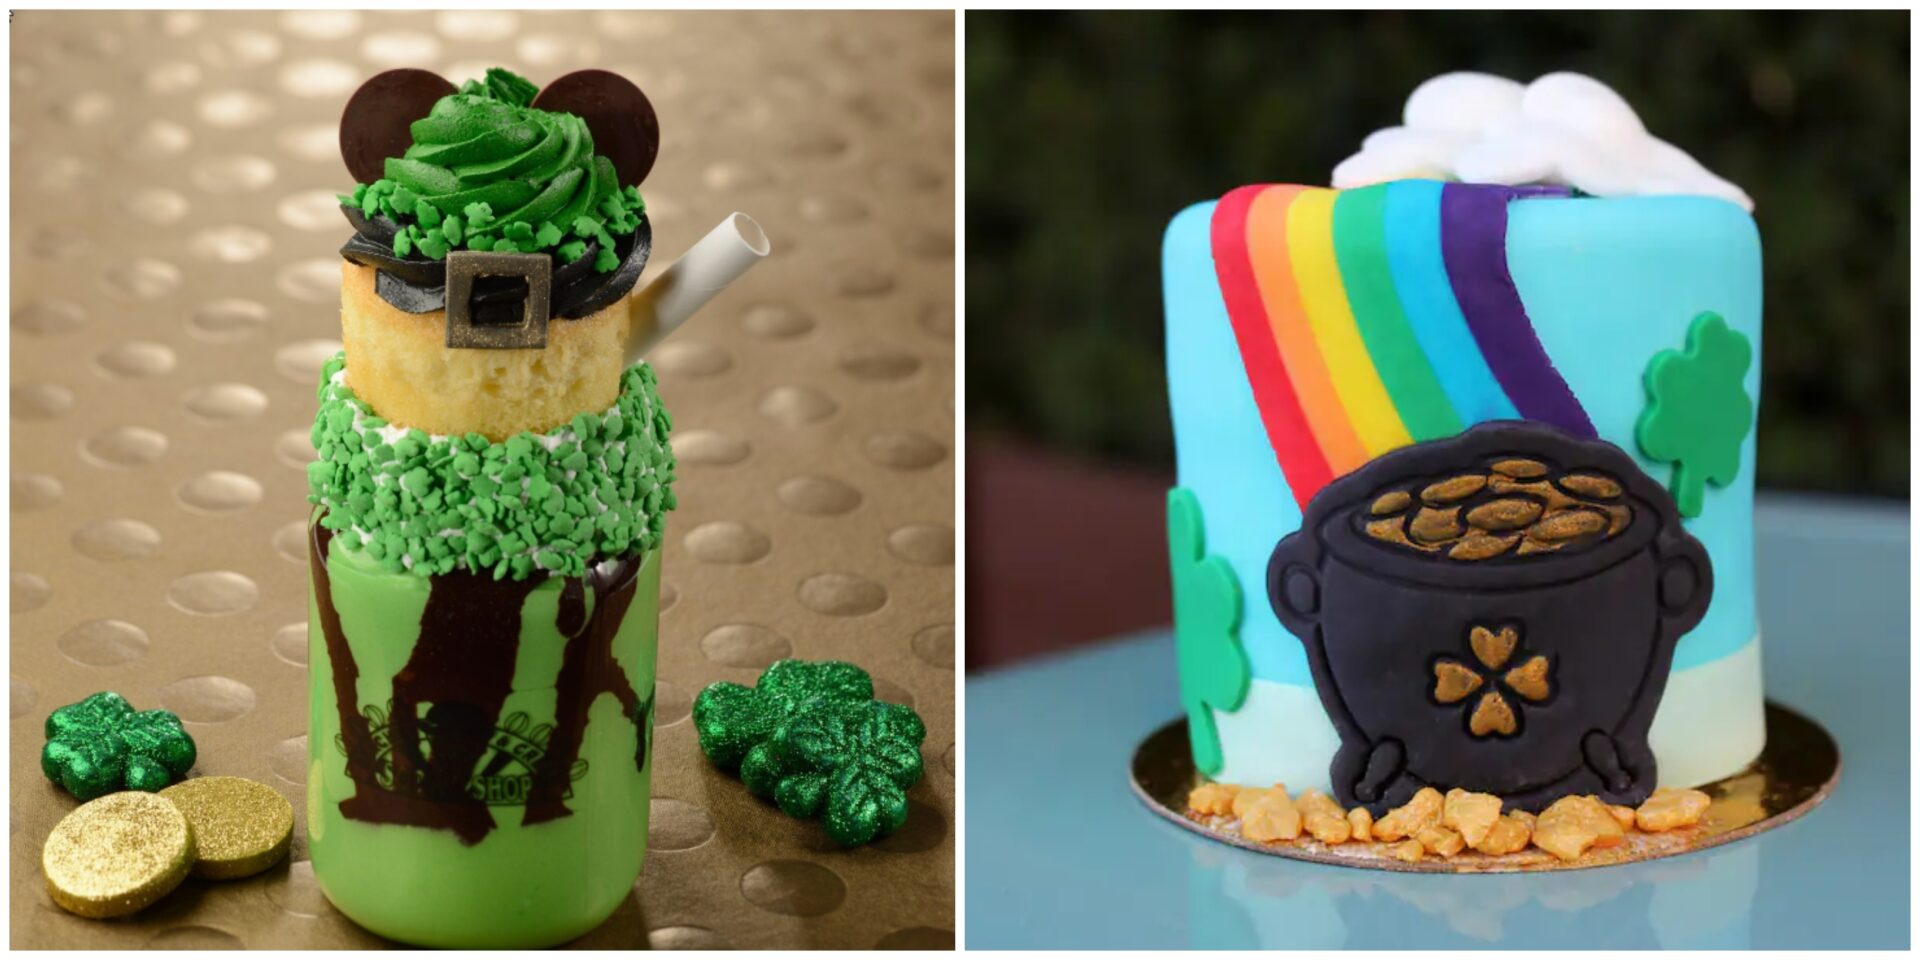 Guide to the St. Patrick’s Day Food and Drink Items Coming to Disney World